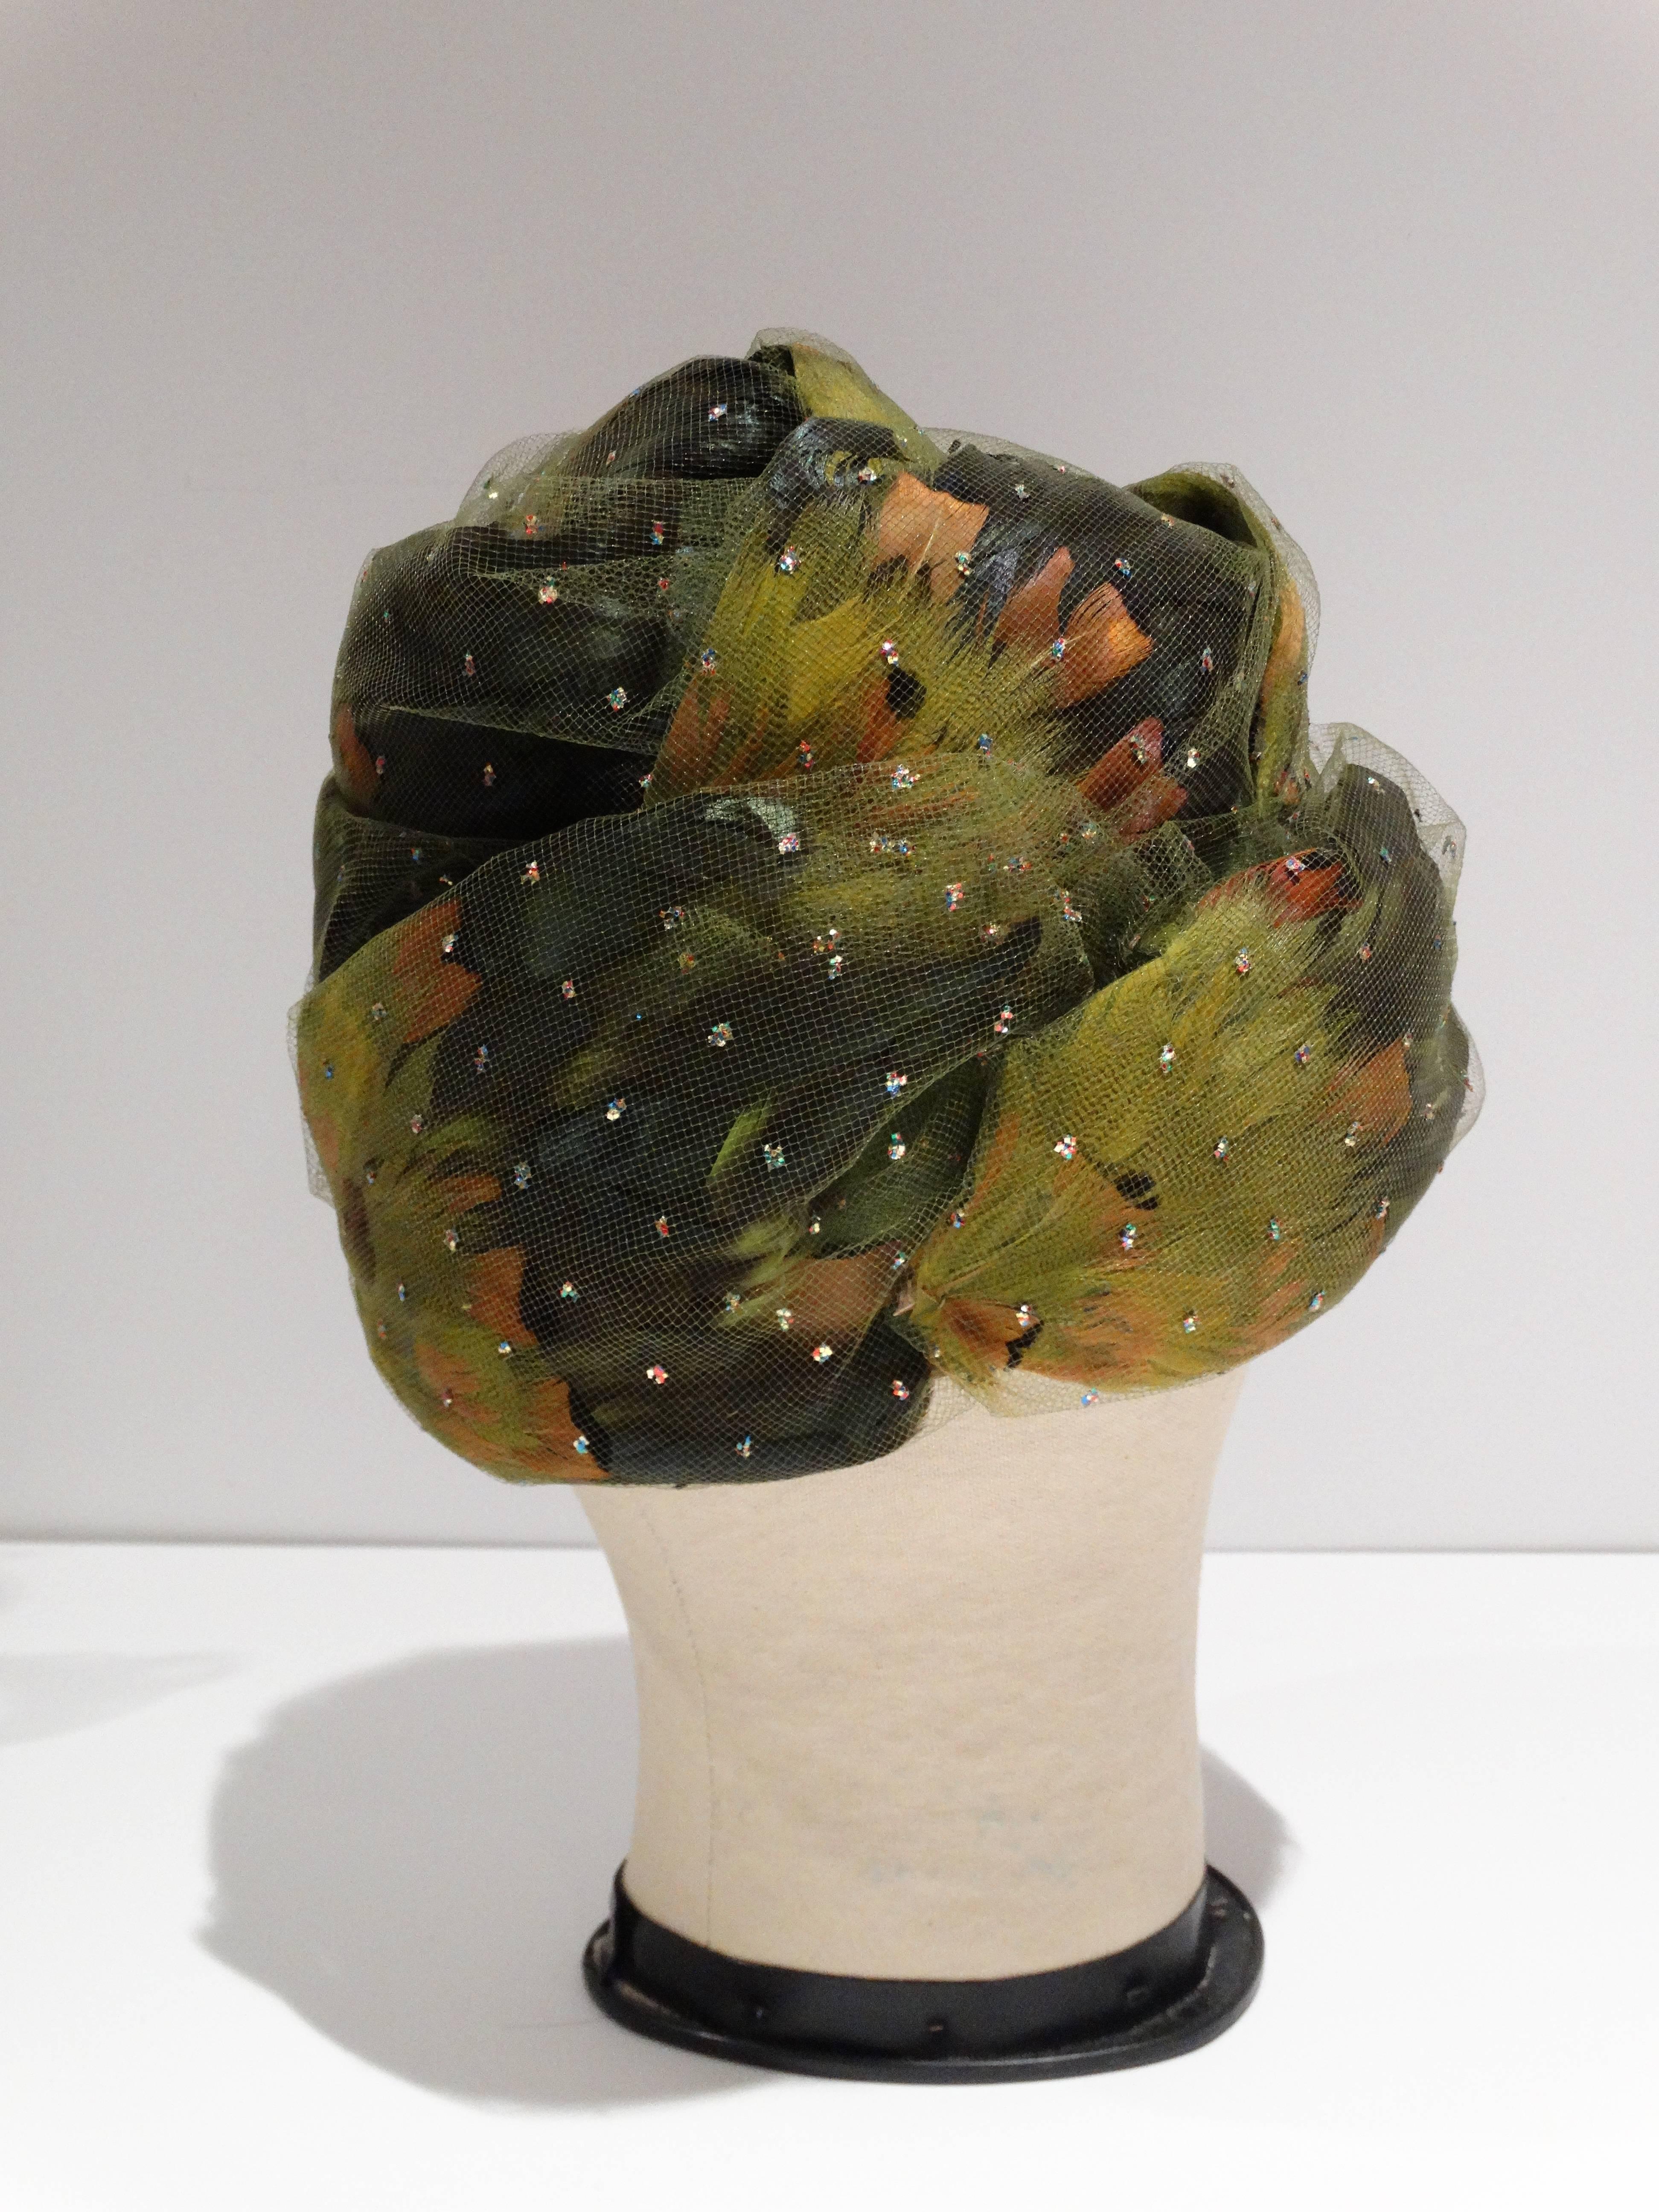 Glorious Colored 1960's Pheasant feathered turban with a touch of sparkle, enrobed in a wispy green netting atop a beautifully rounded form... all of this and the Iconic Milliner's Label to add......Christian Dior!! This Turban is in Fabulous shape,